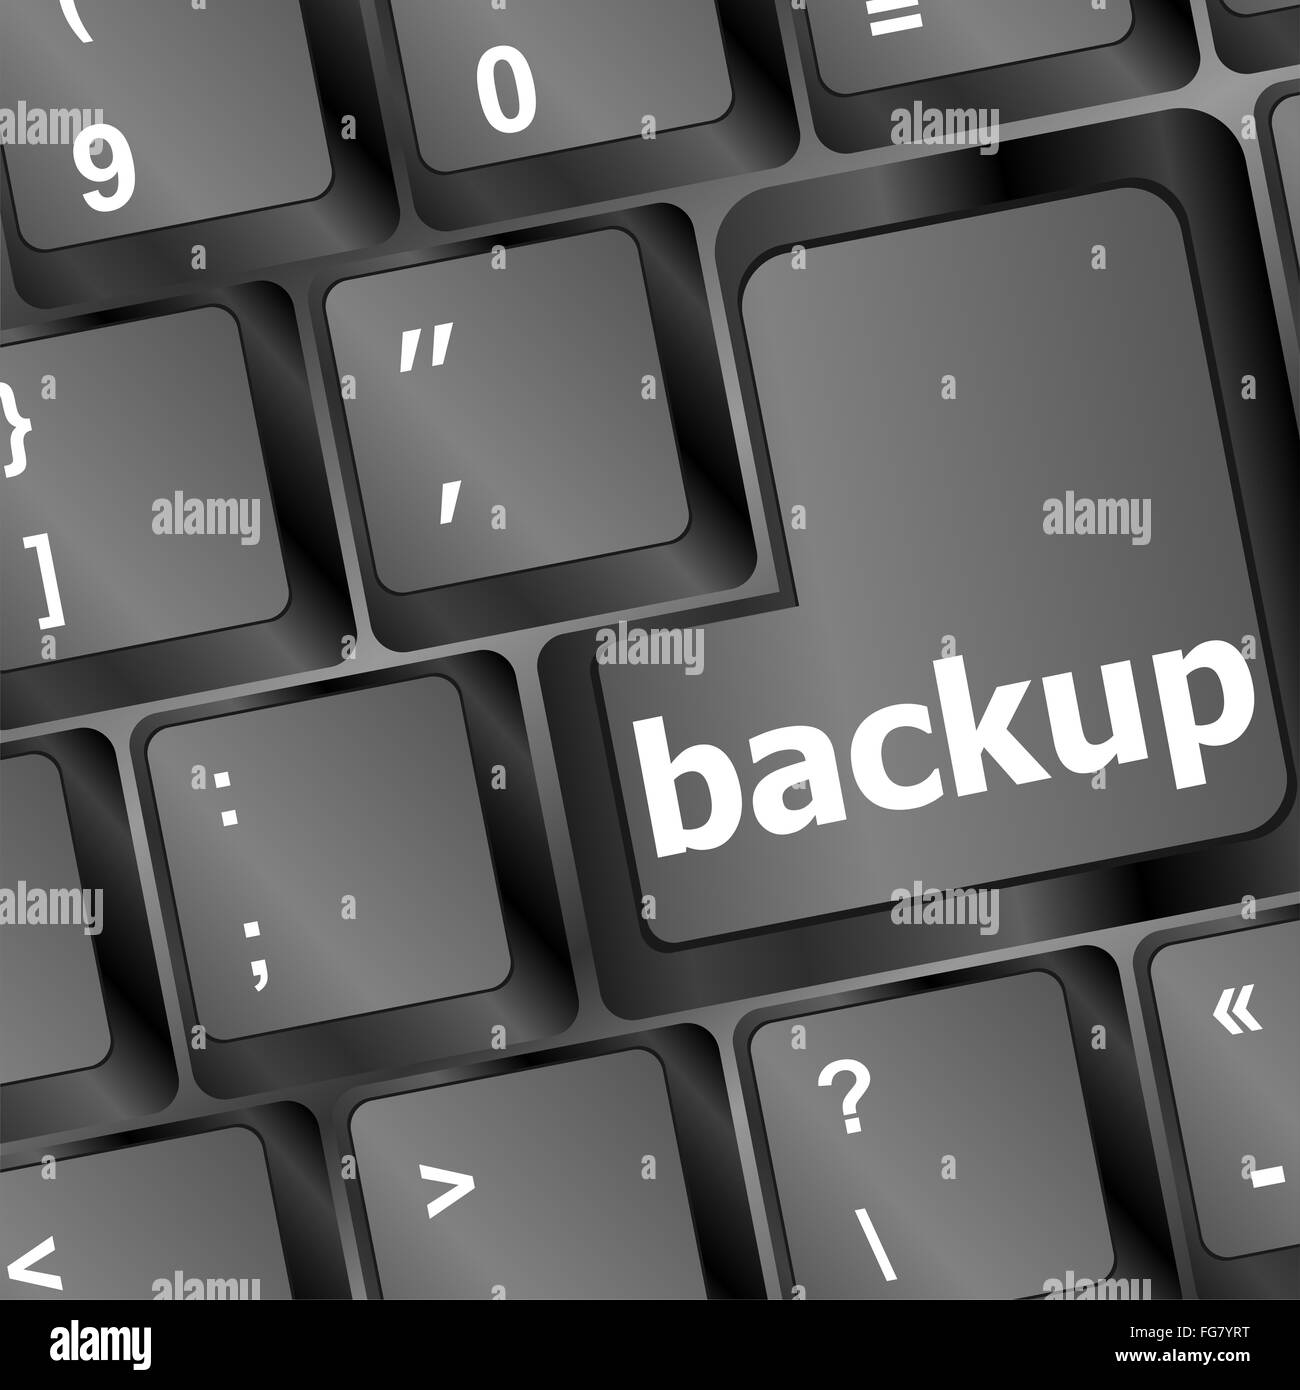 Backup computer key in black for archiving and storage Stock Photo